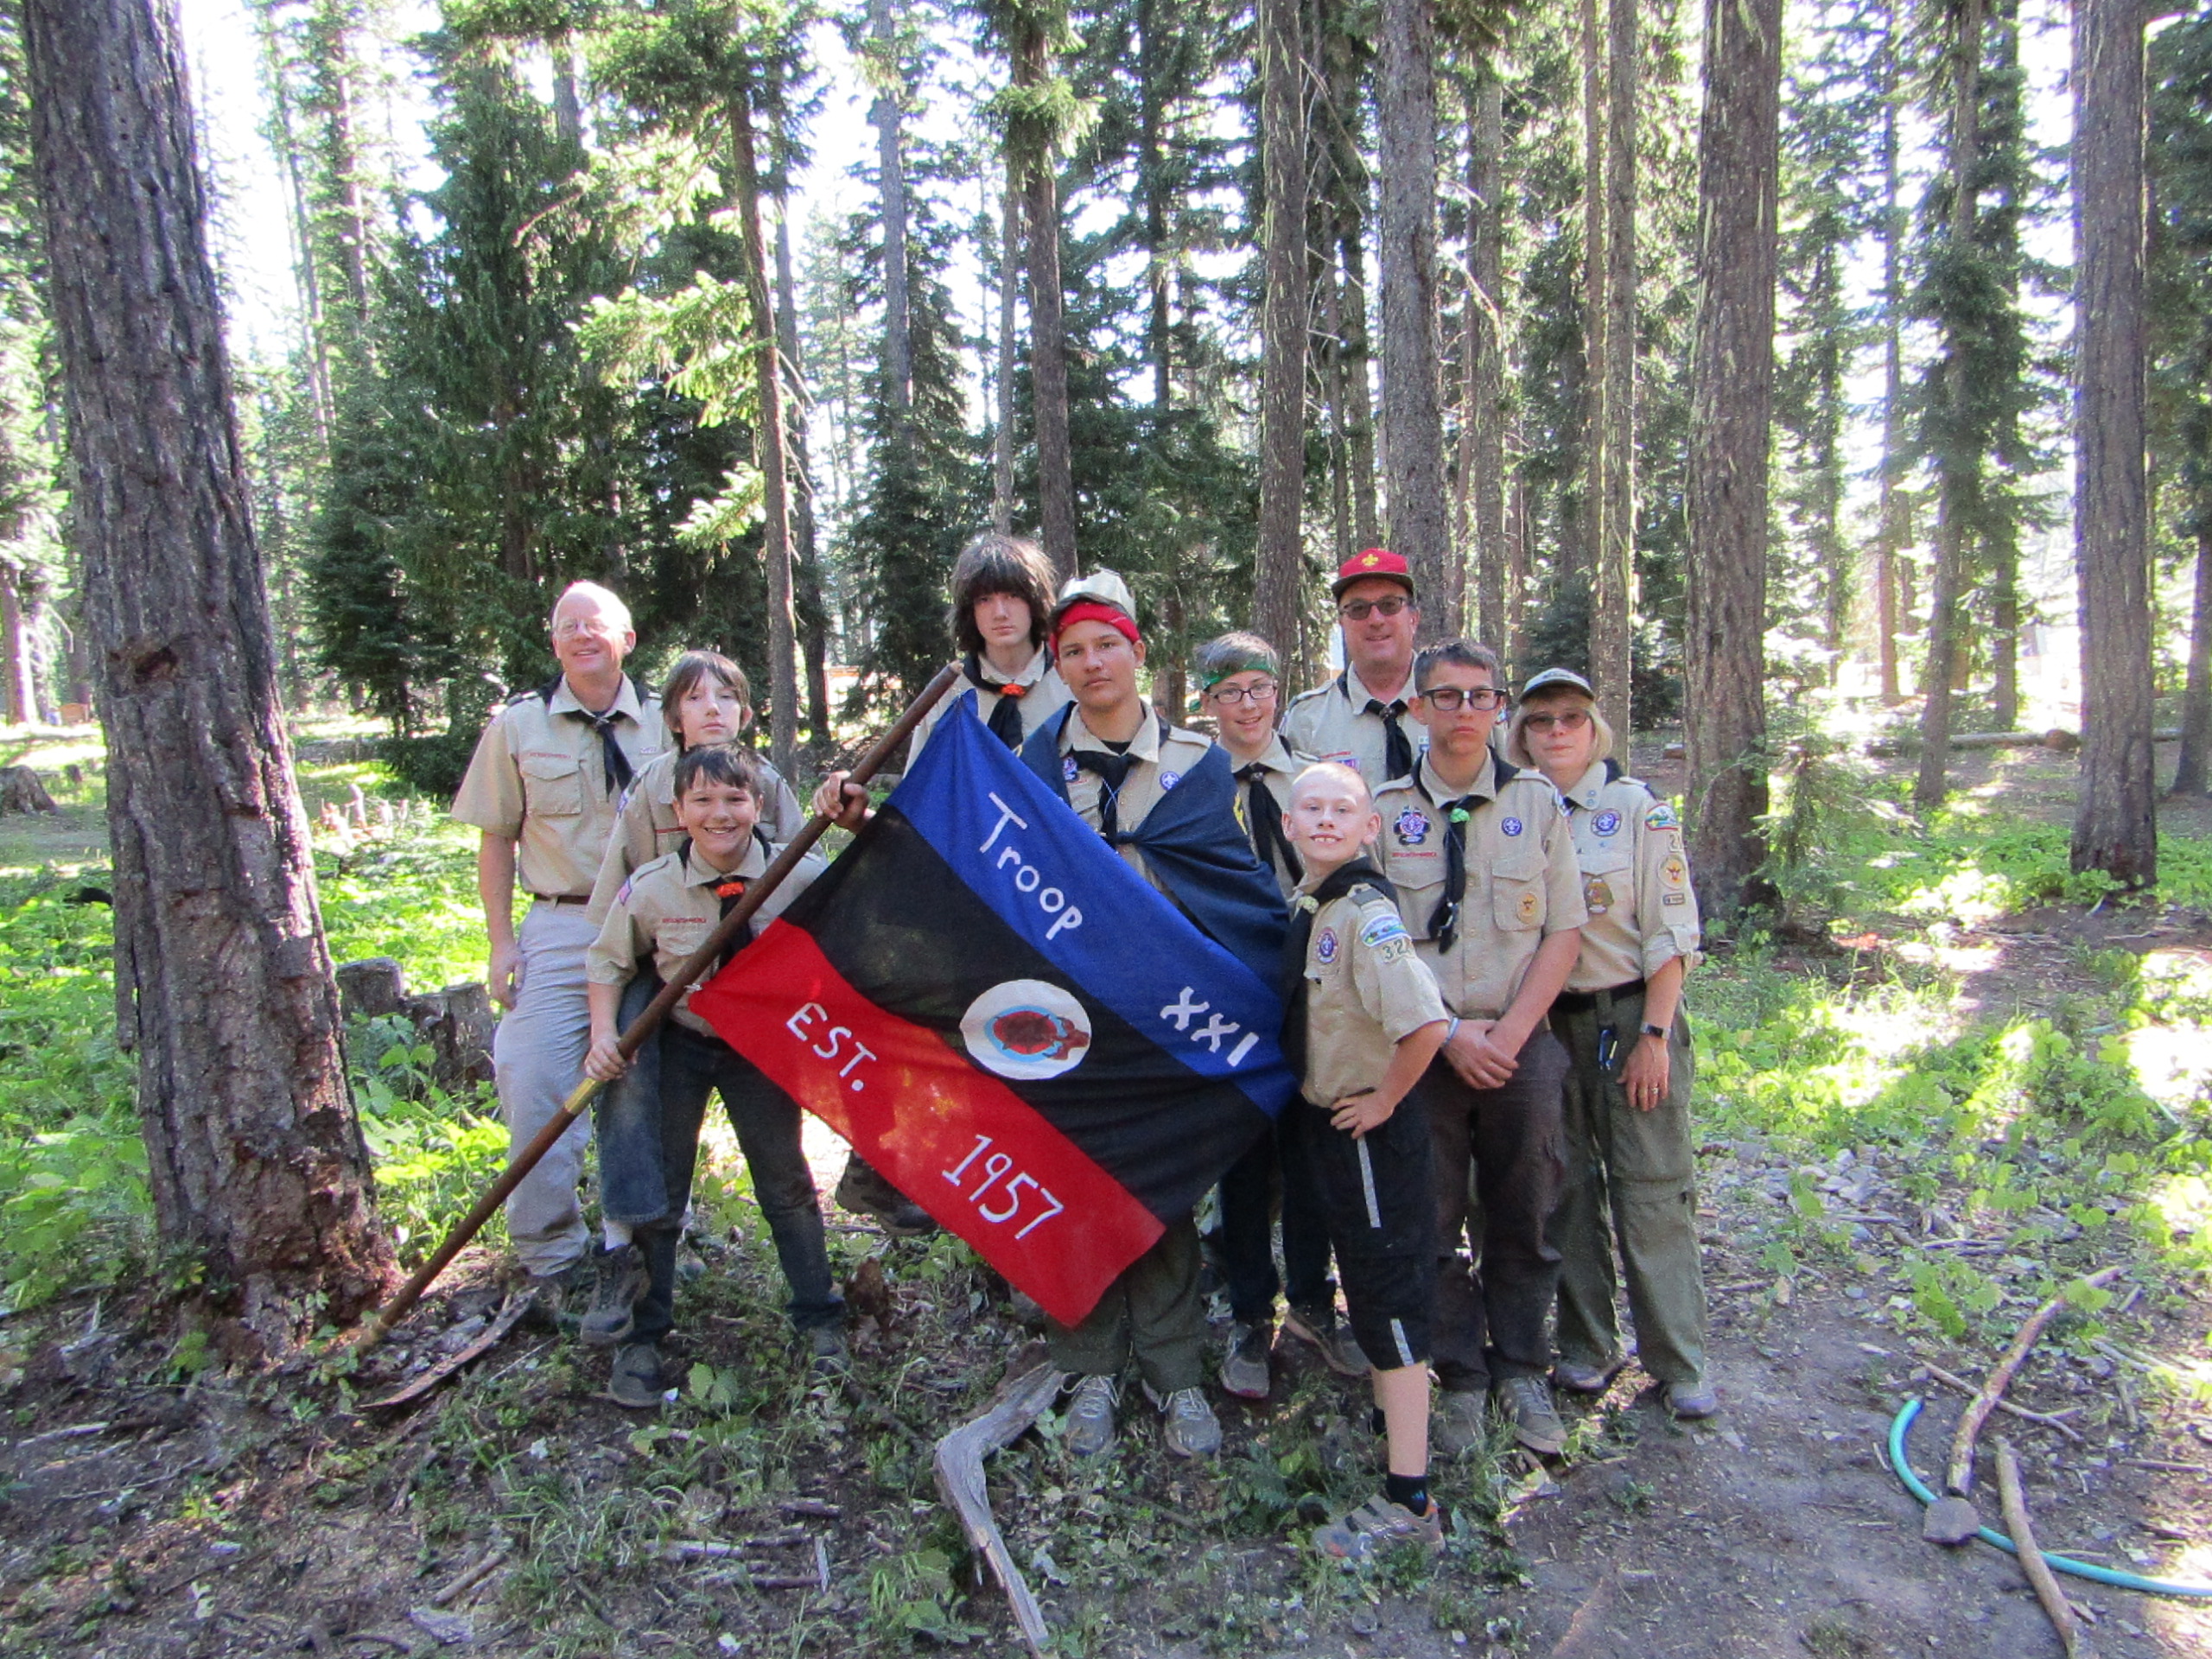 Group photo of boy scout troop 21